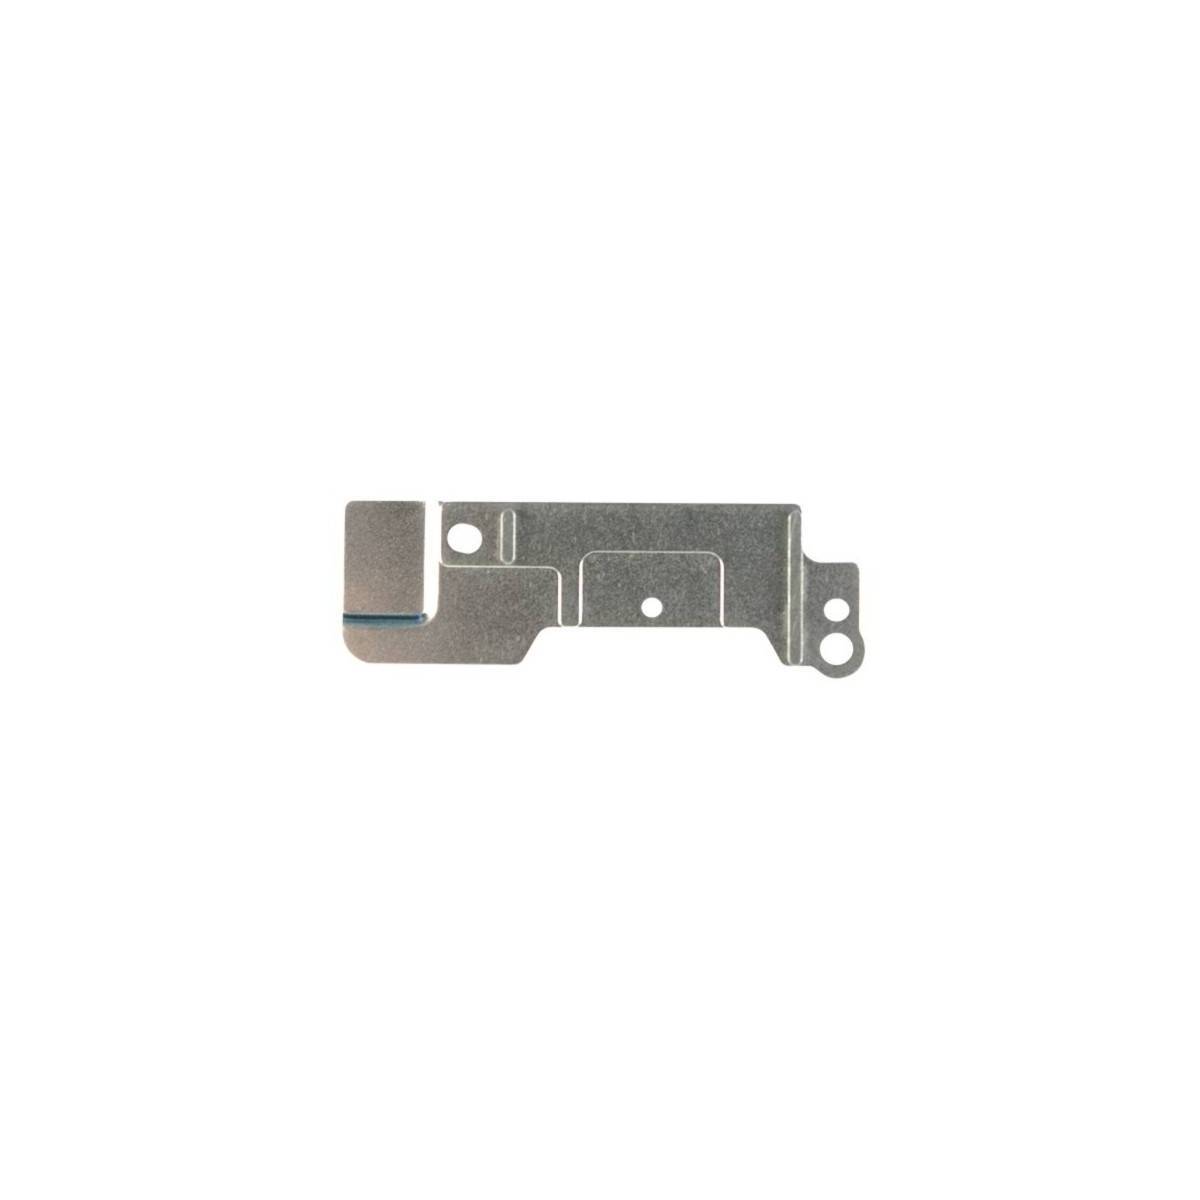 Support bouton home iPhone 6s